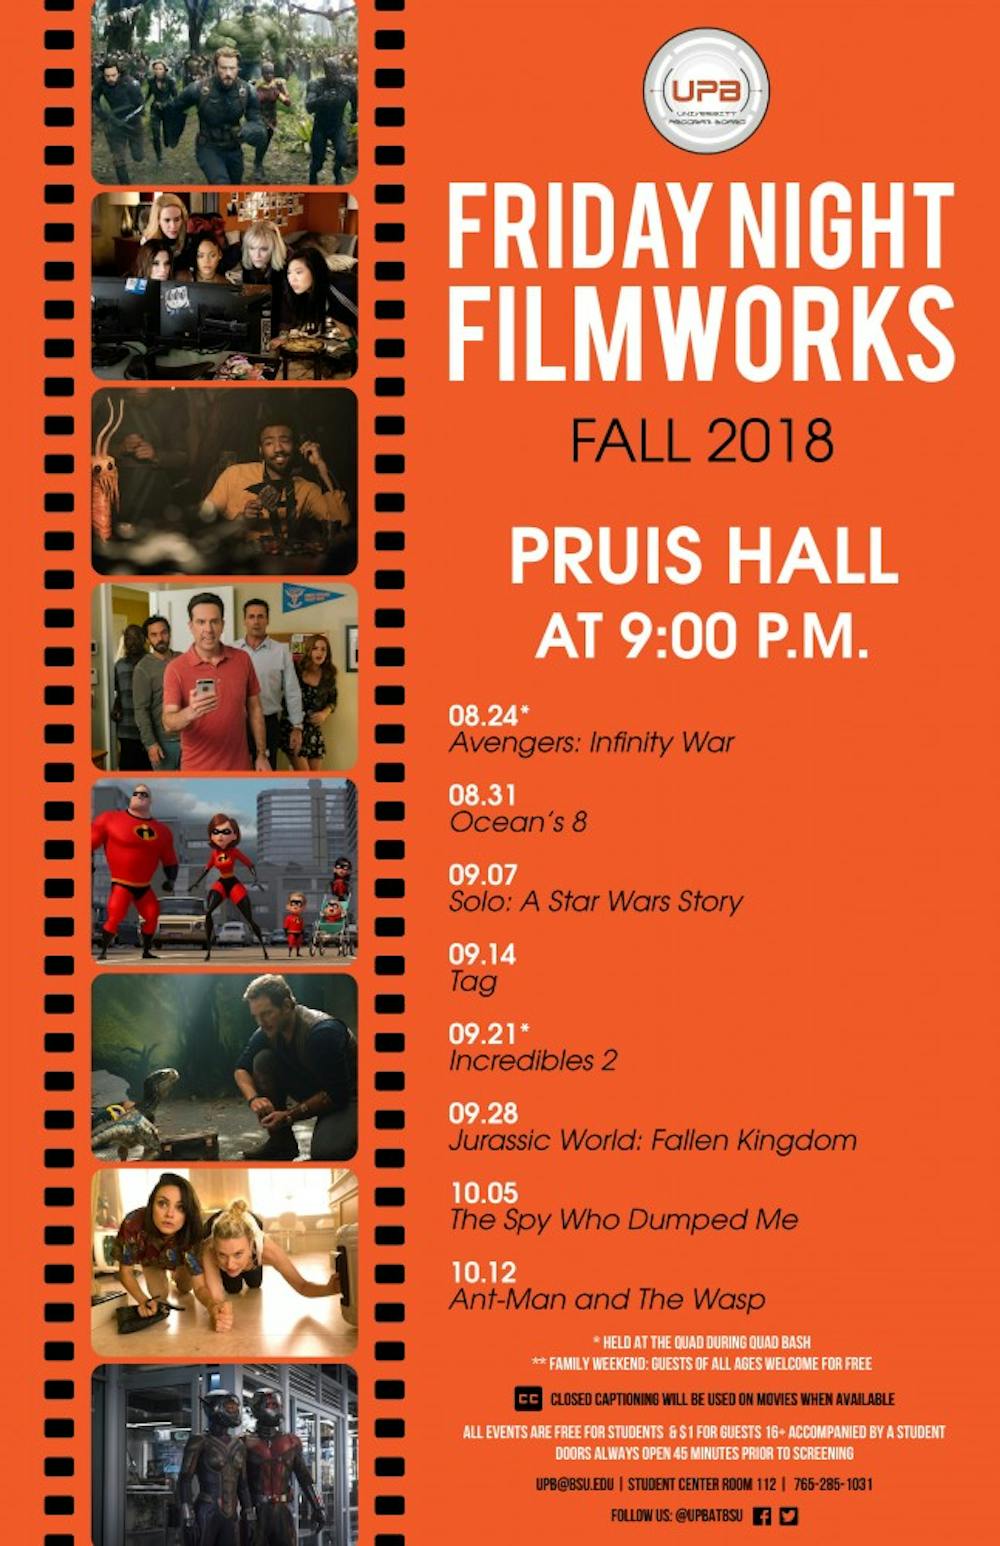 <p>University Program Board's Friday Night Filmworks fall schedule listed to show at Pruis Hall at 9 p.m.&nbsp;</p>